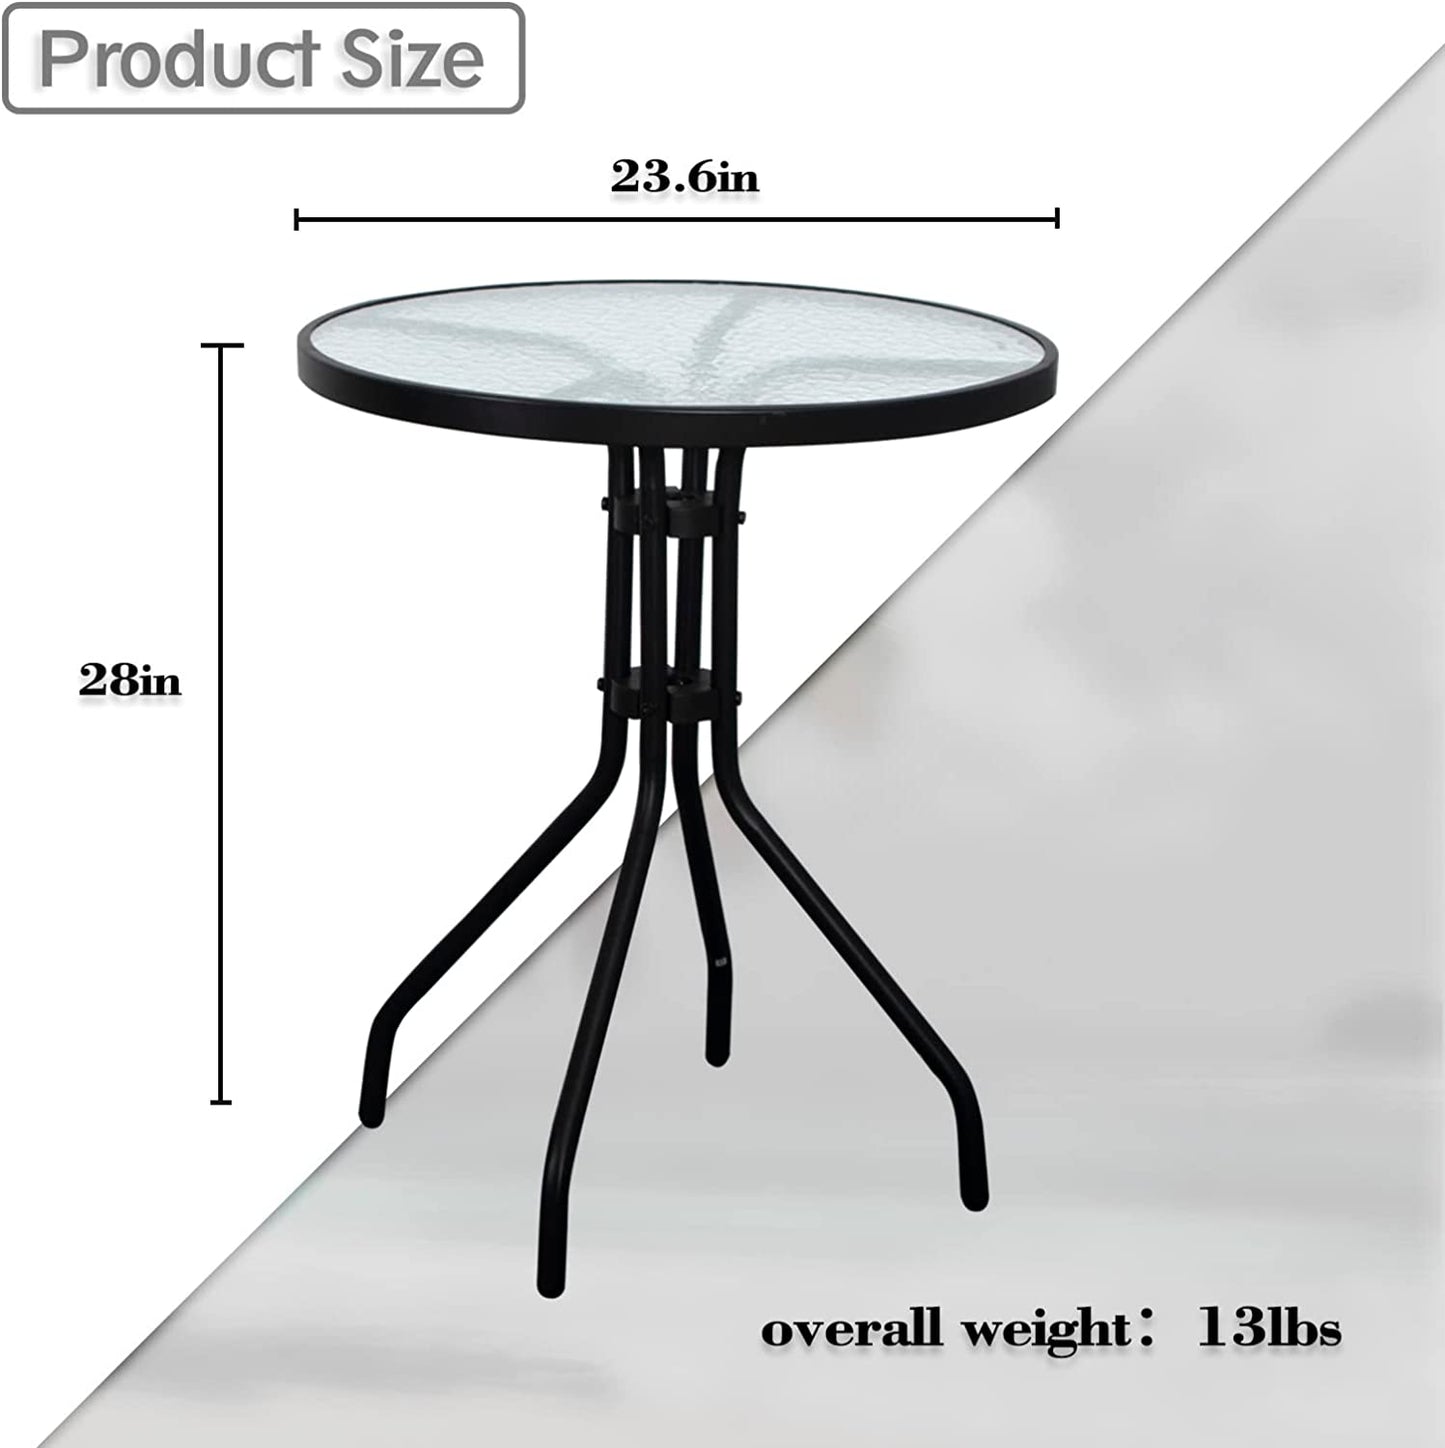 DIMAR GARDEN 24" Outdoor Side Table Patio Metal round Bistro Coffee Table with Glass Top,Black